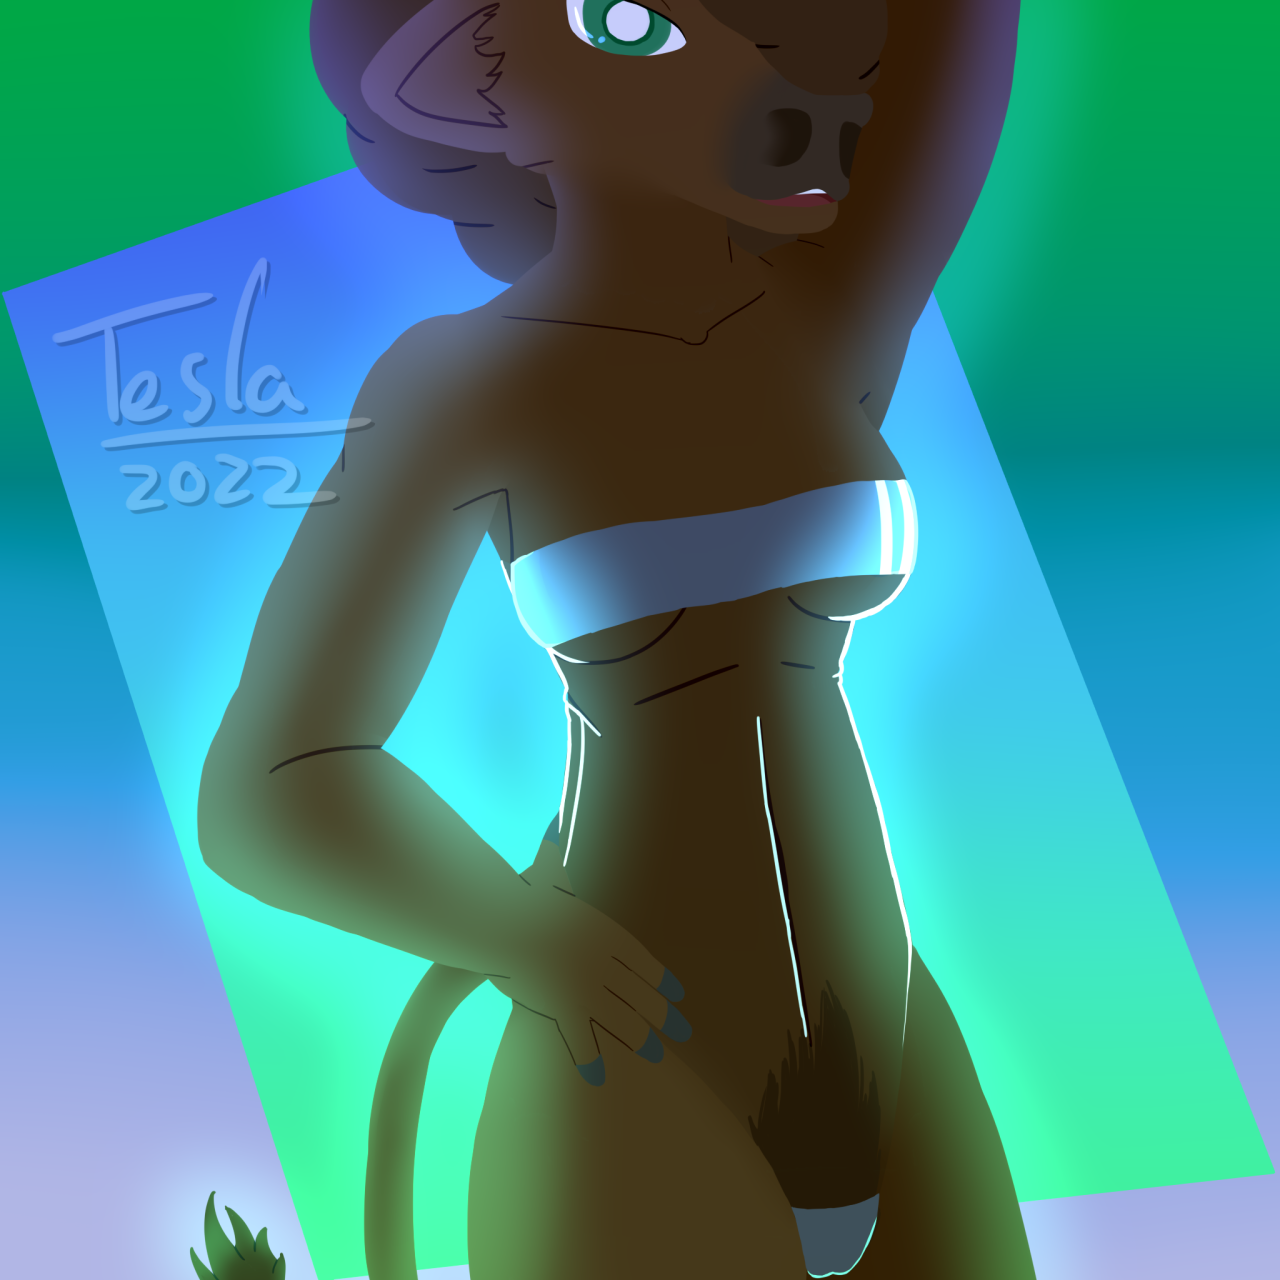 A quick one after work, I really wanted to do this meme and here it is! #furry#anthro#digitalDrawing#grisswimsuit